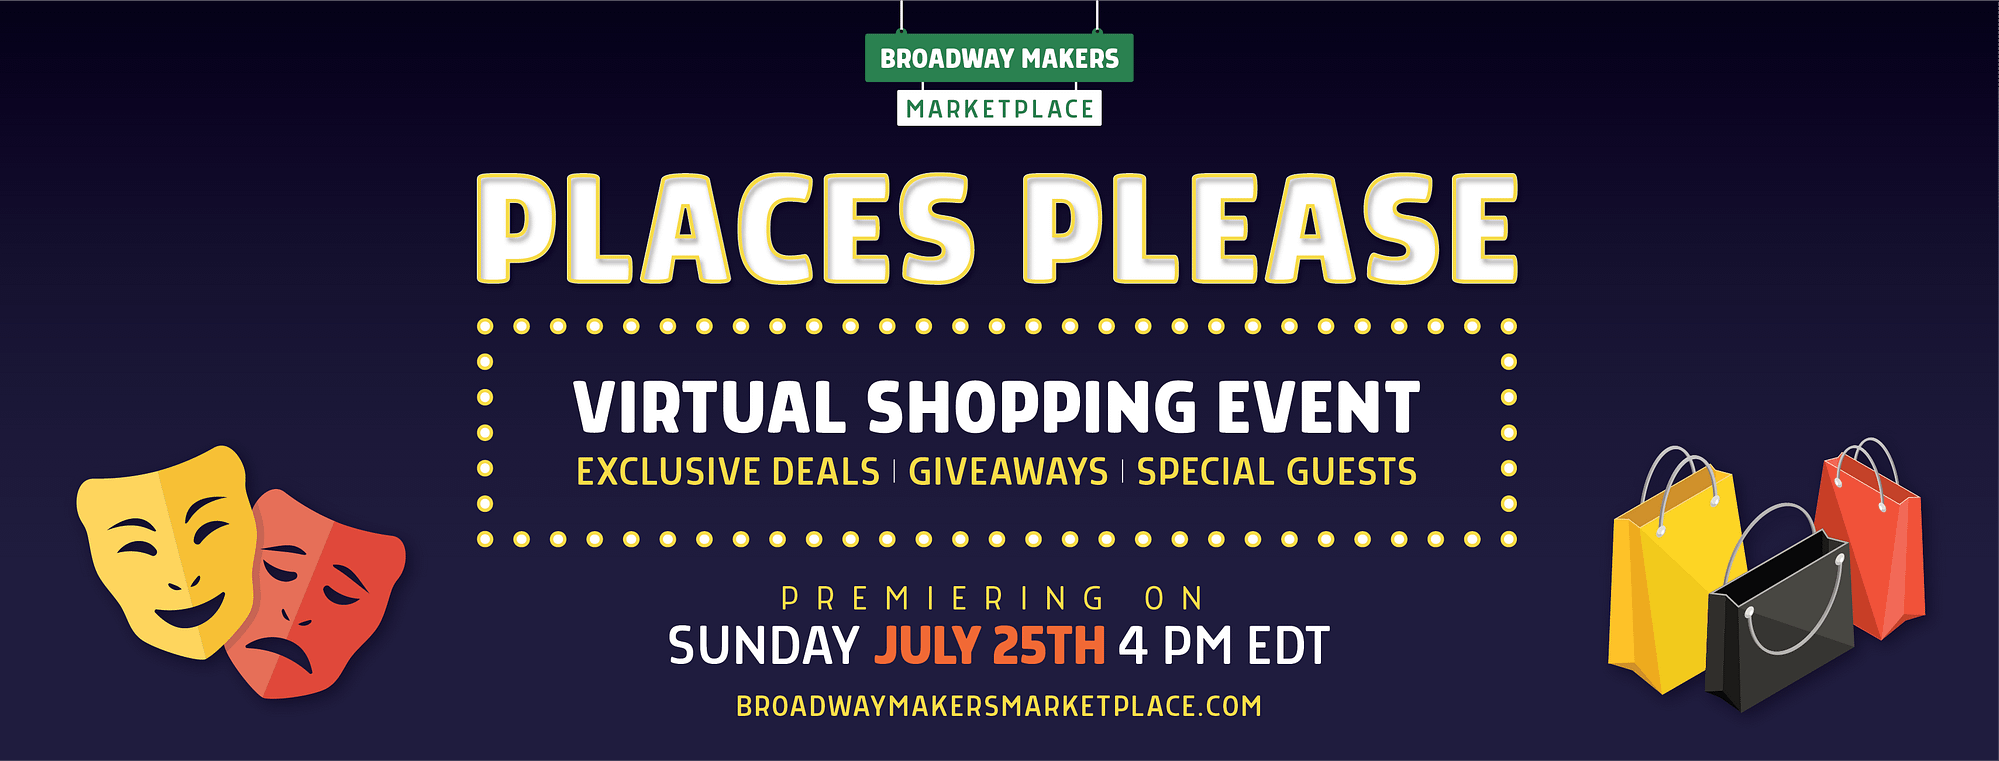 Places Please! Virtual Shopping Event